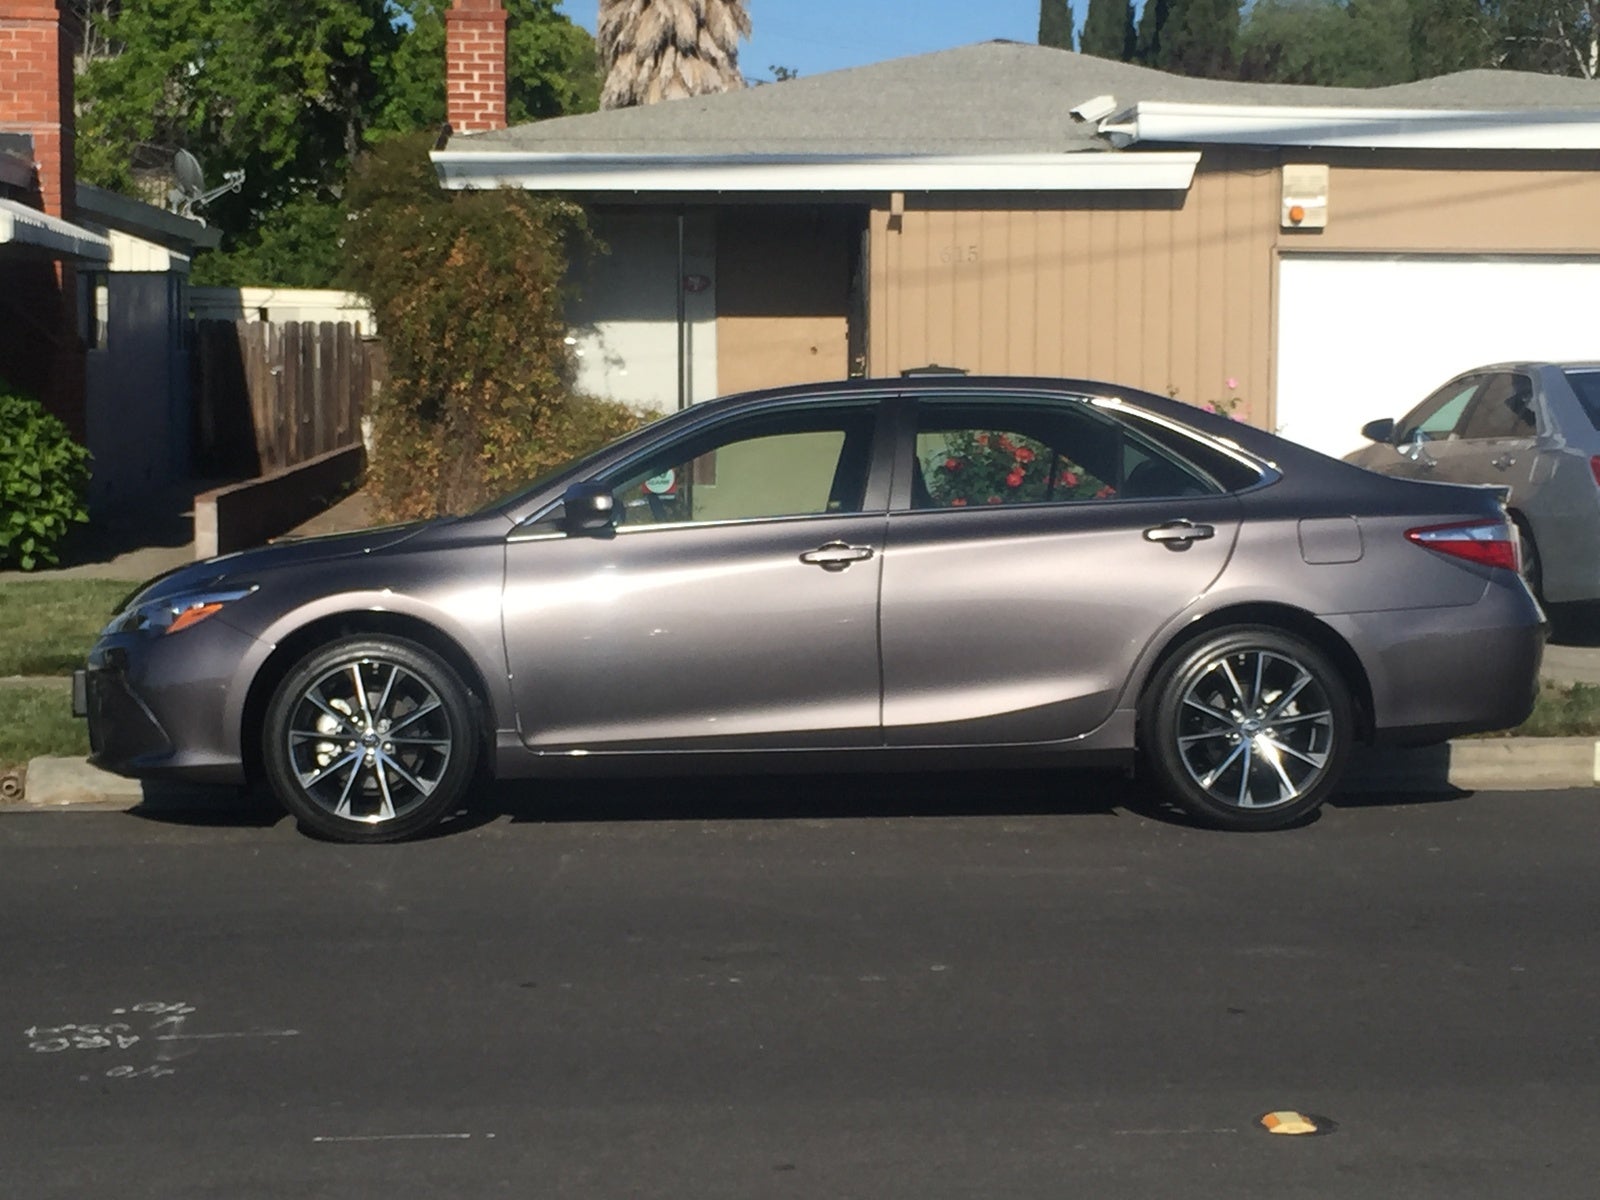 Toyota Camry Questions - How much is a 2015 Toyota Camry XSE with ...